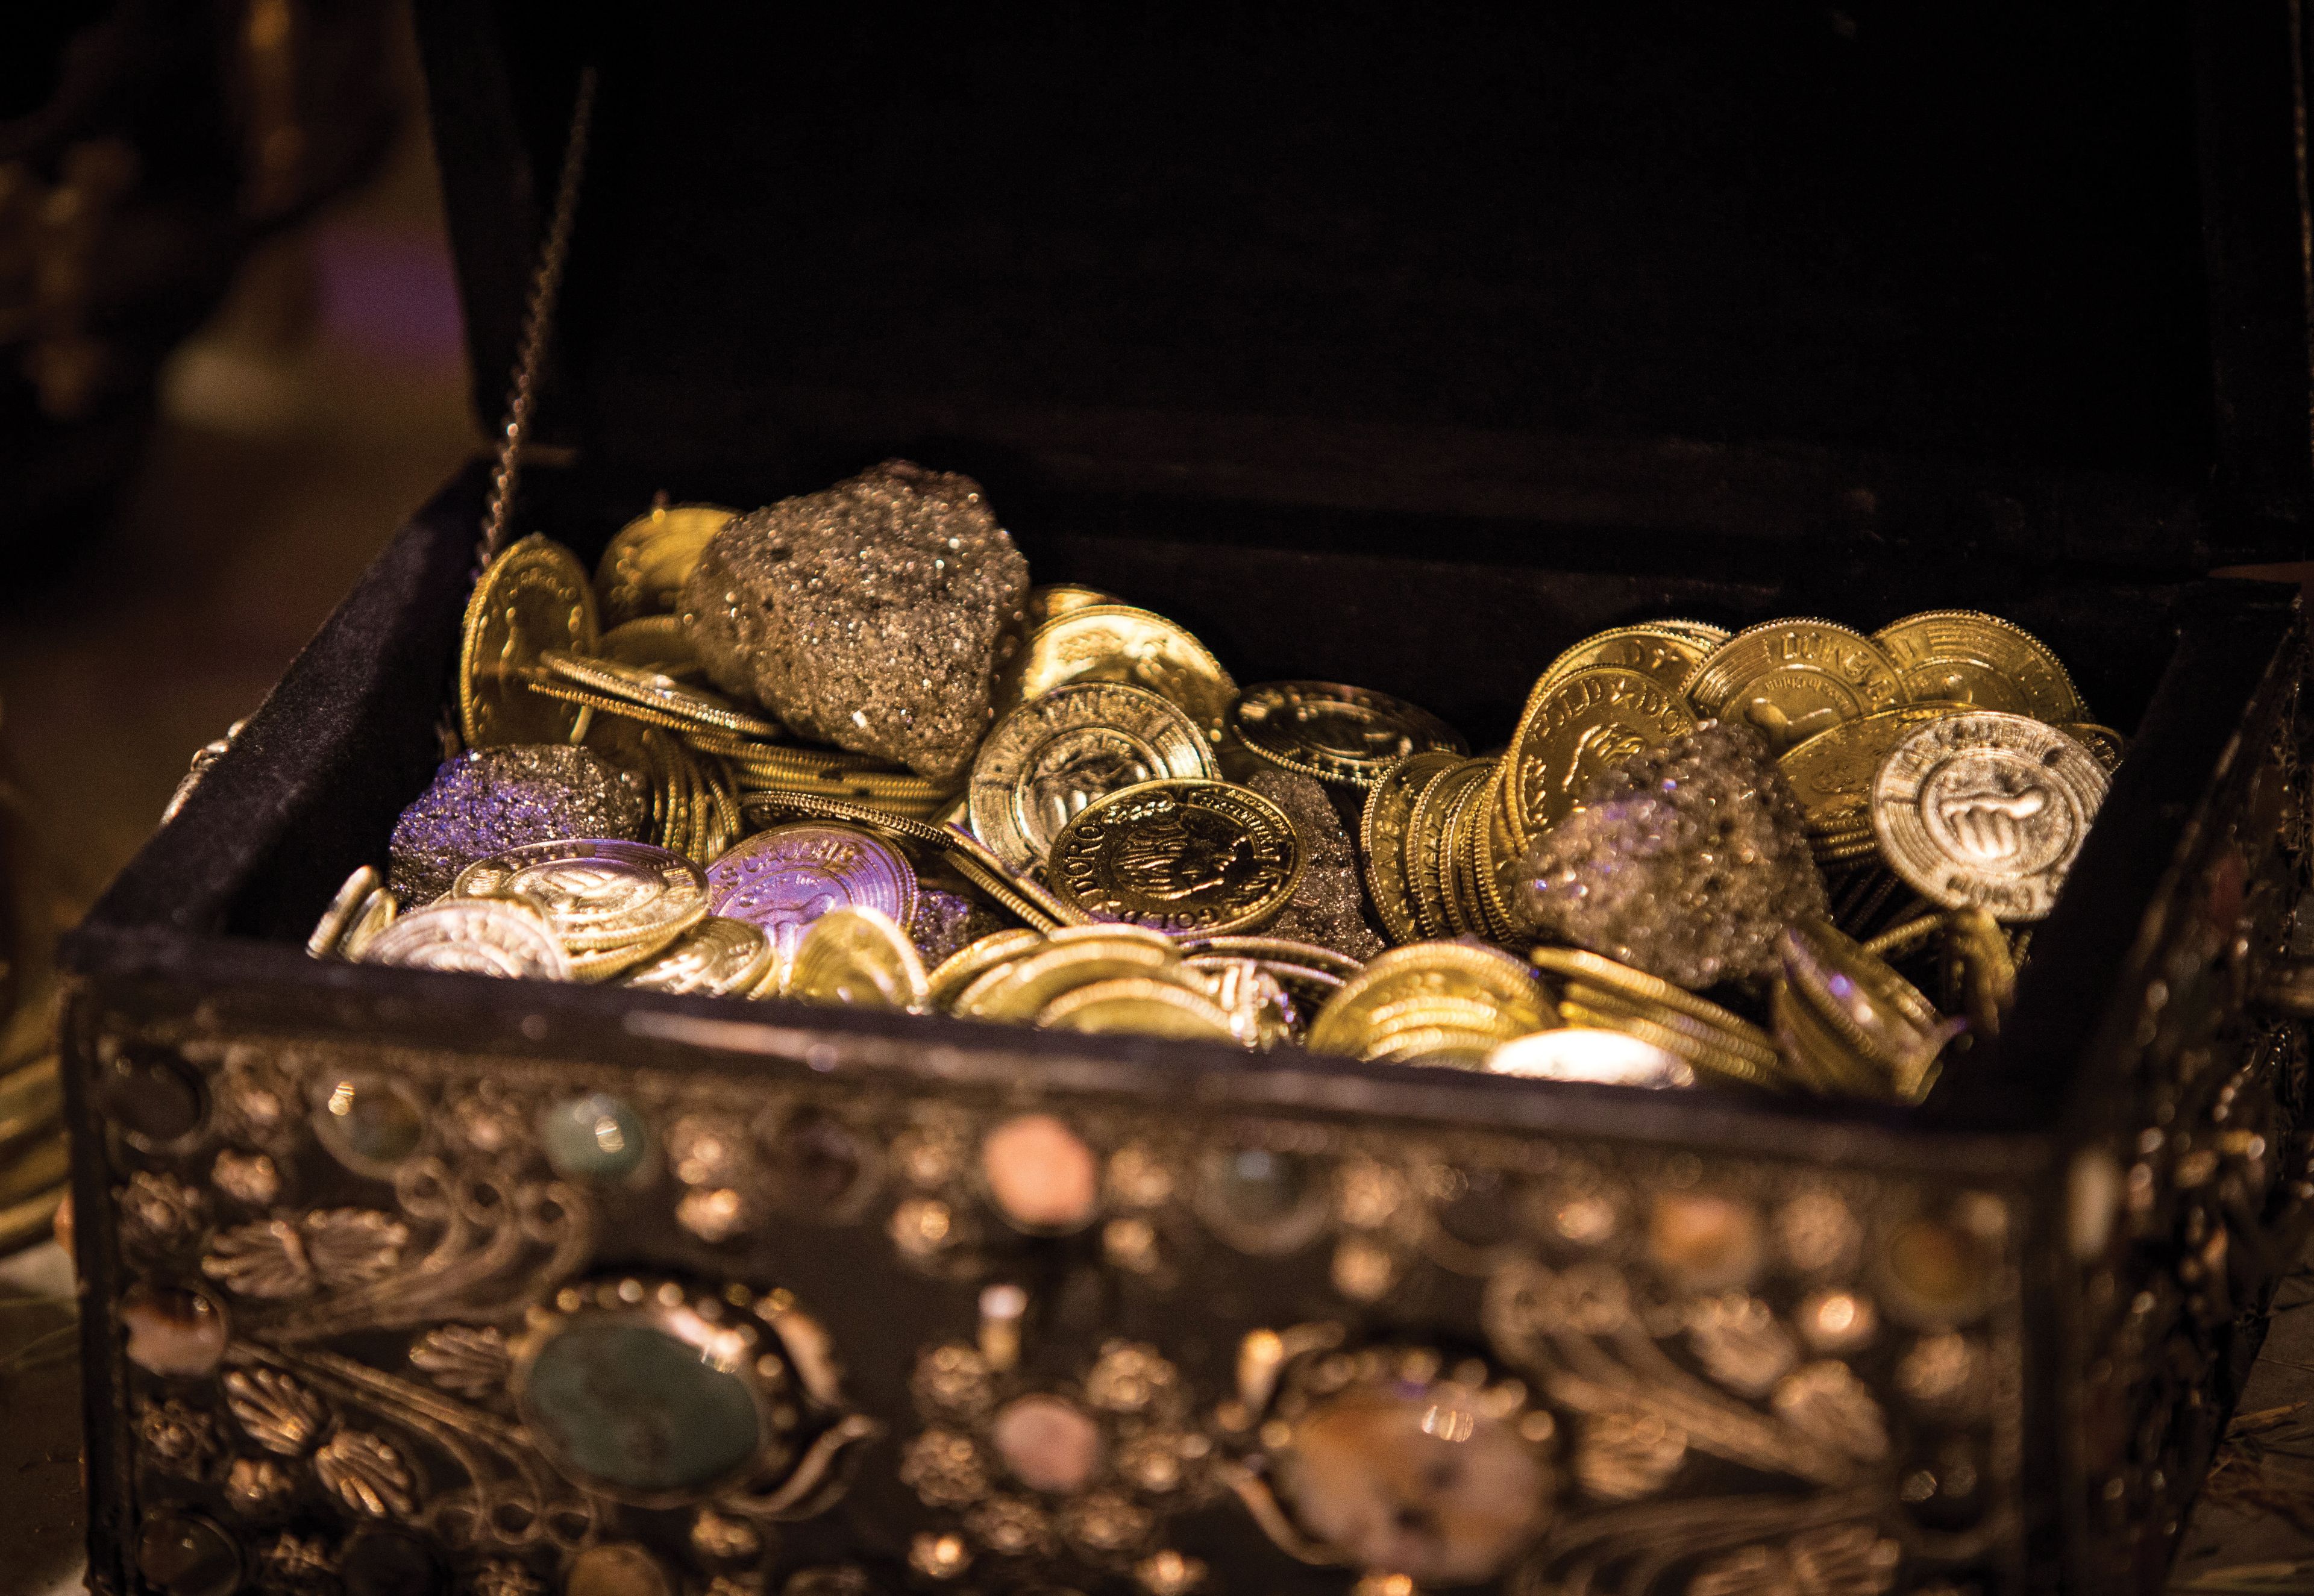 A small chest filled with treasure.